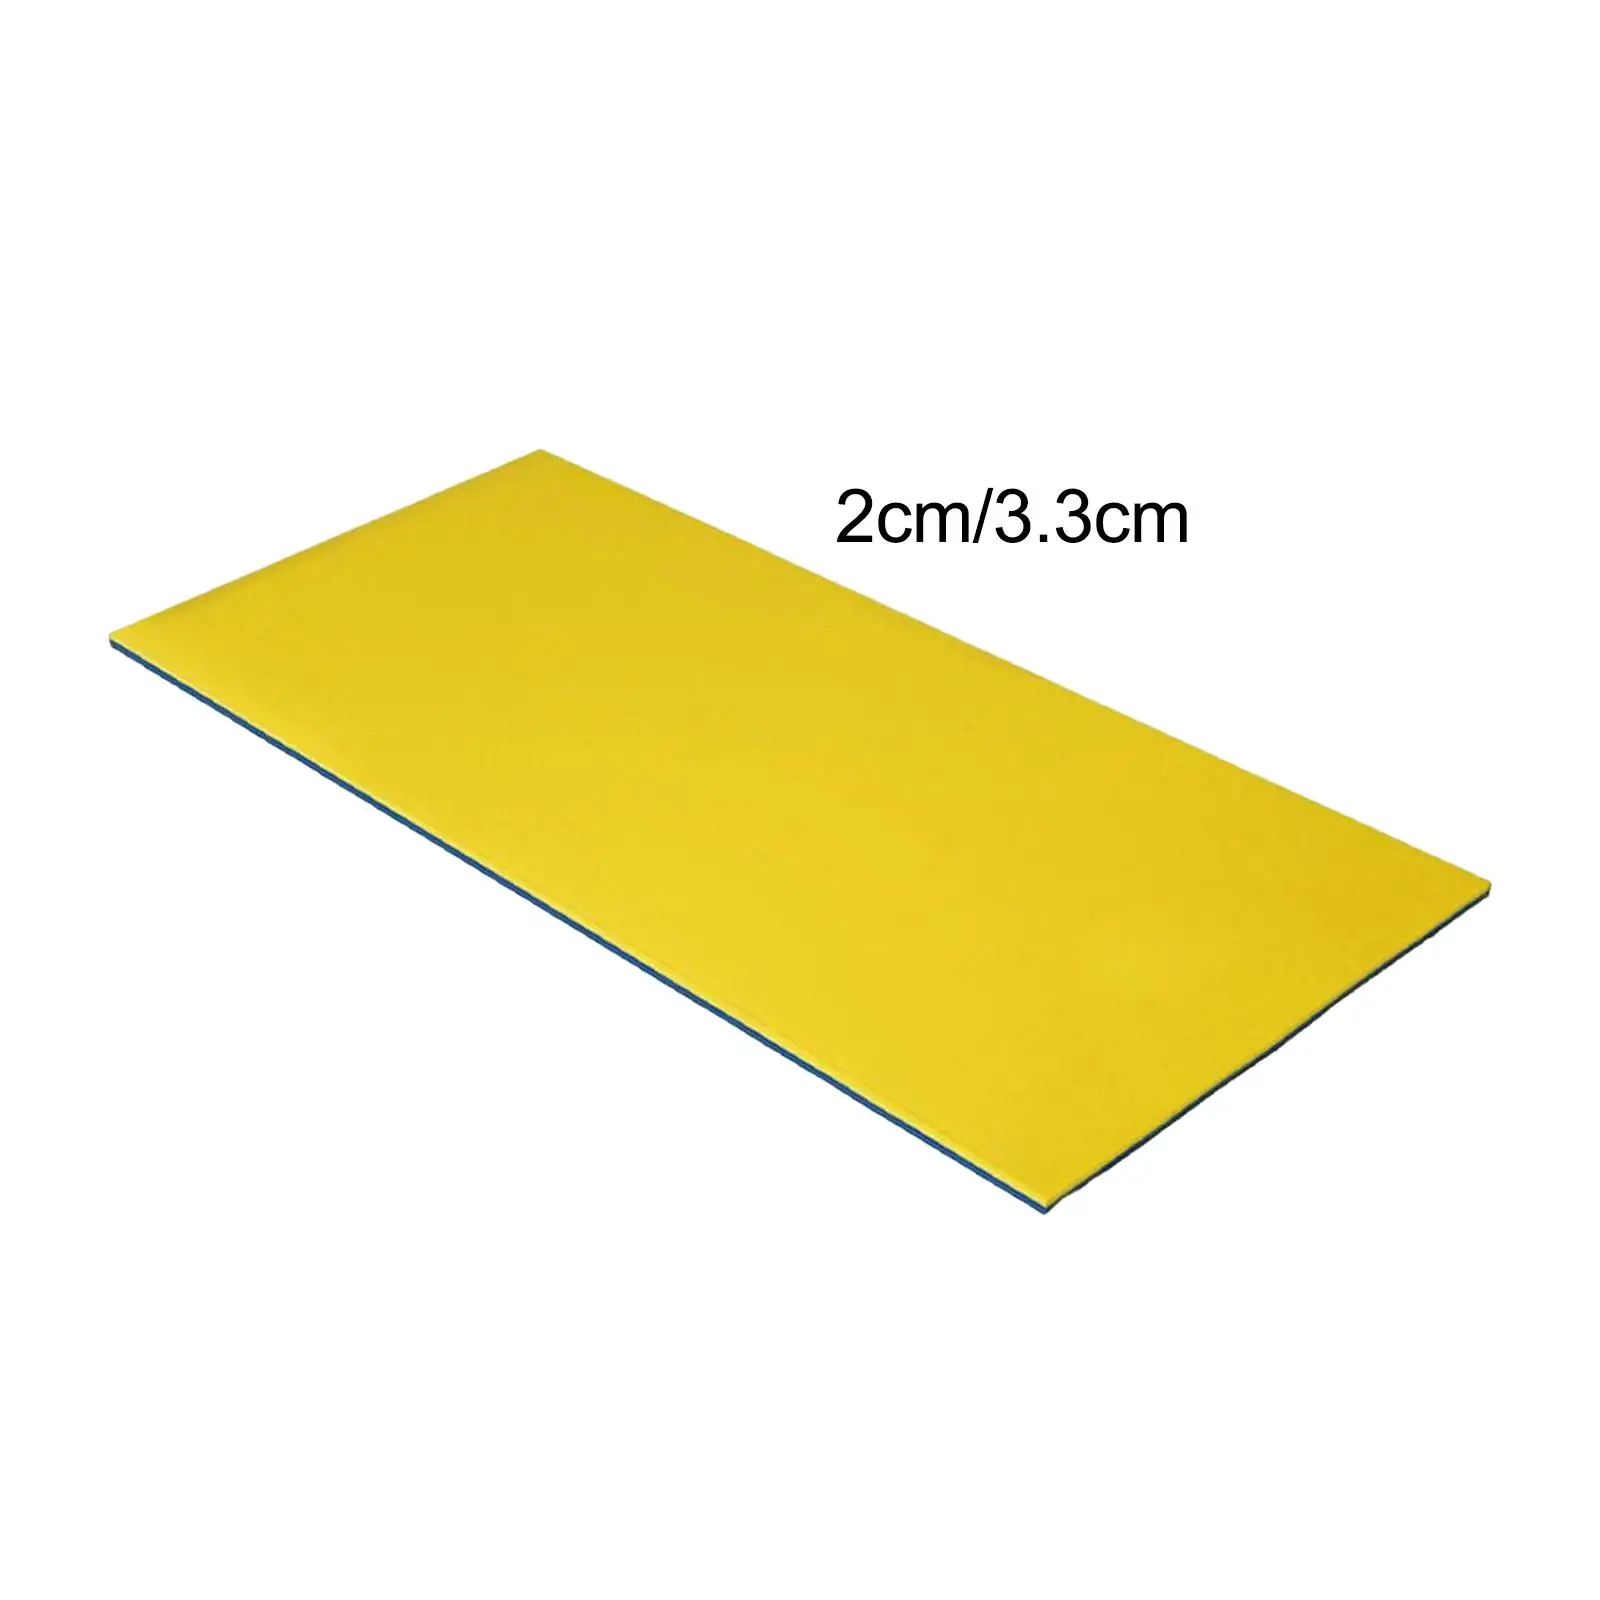 Floating Blanket Durable Floating Mat Pool for Holidays Swimming Pools Beach